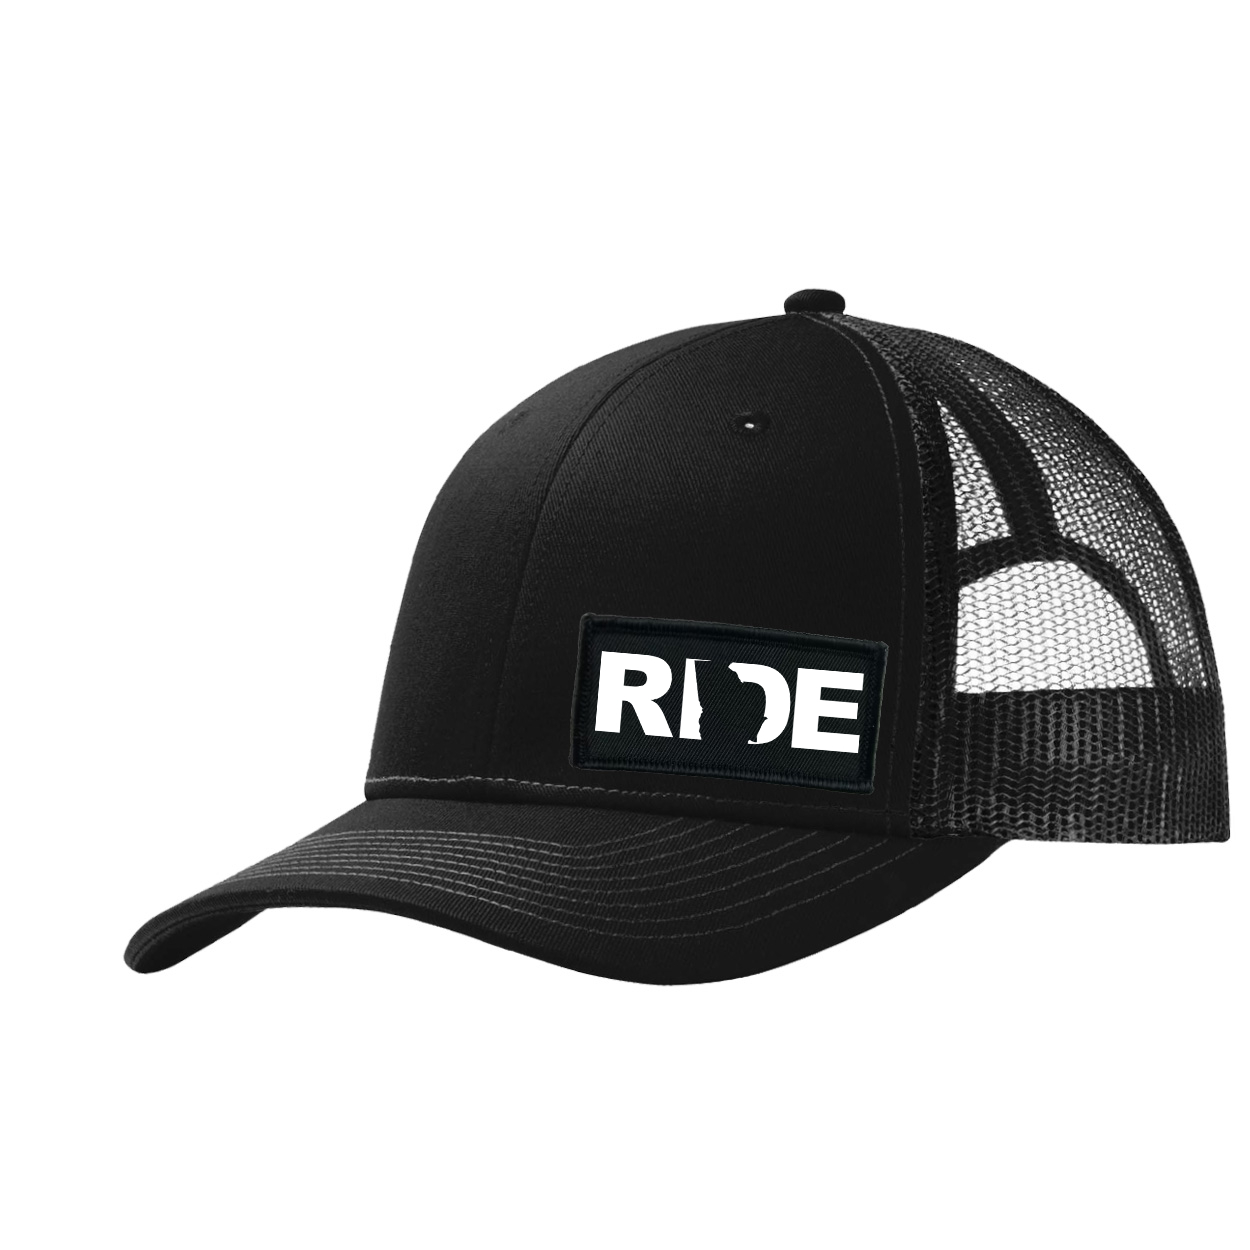 Ride Georgia Night Out Woven Patch Snapback Trucker Hat Black (White Logo)